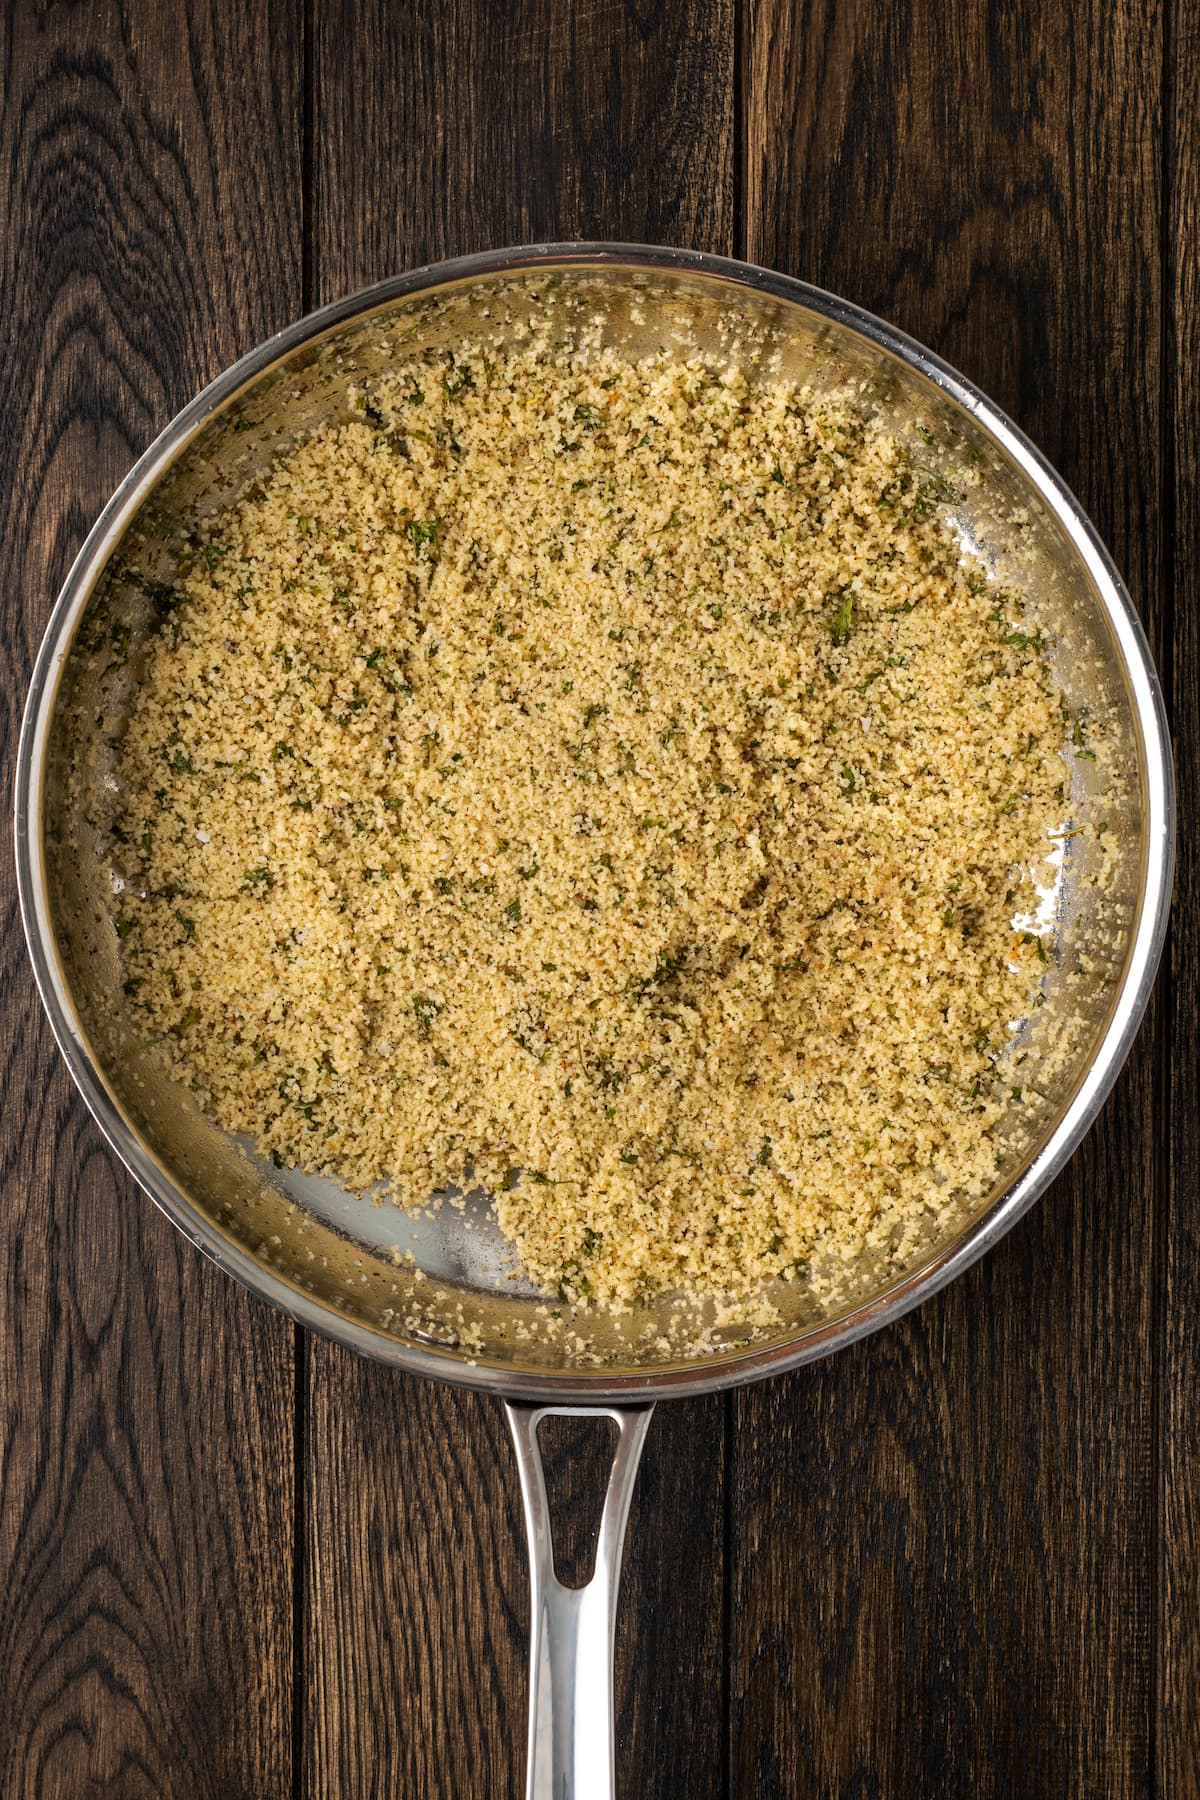 Breadcrumbs toasting in a skillet with butter and seasonings.